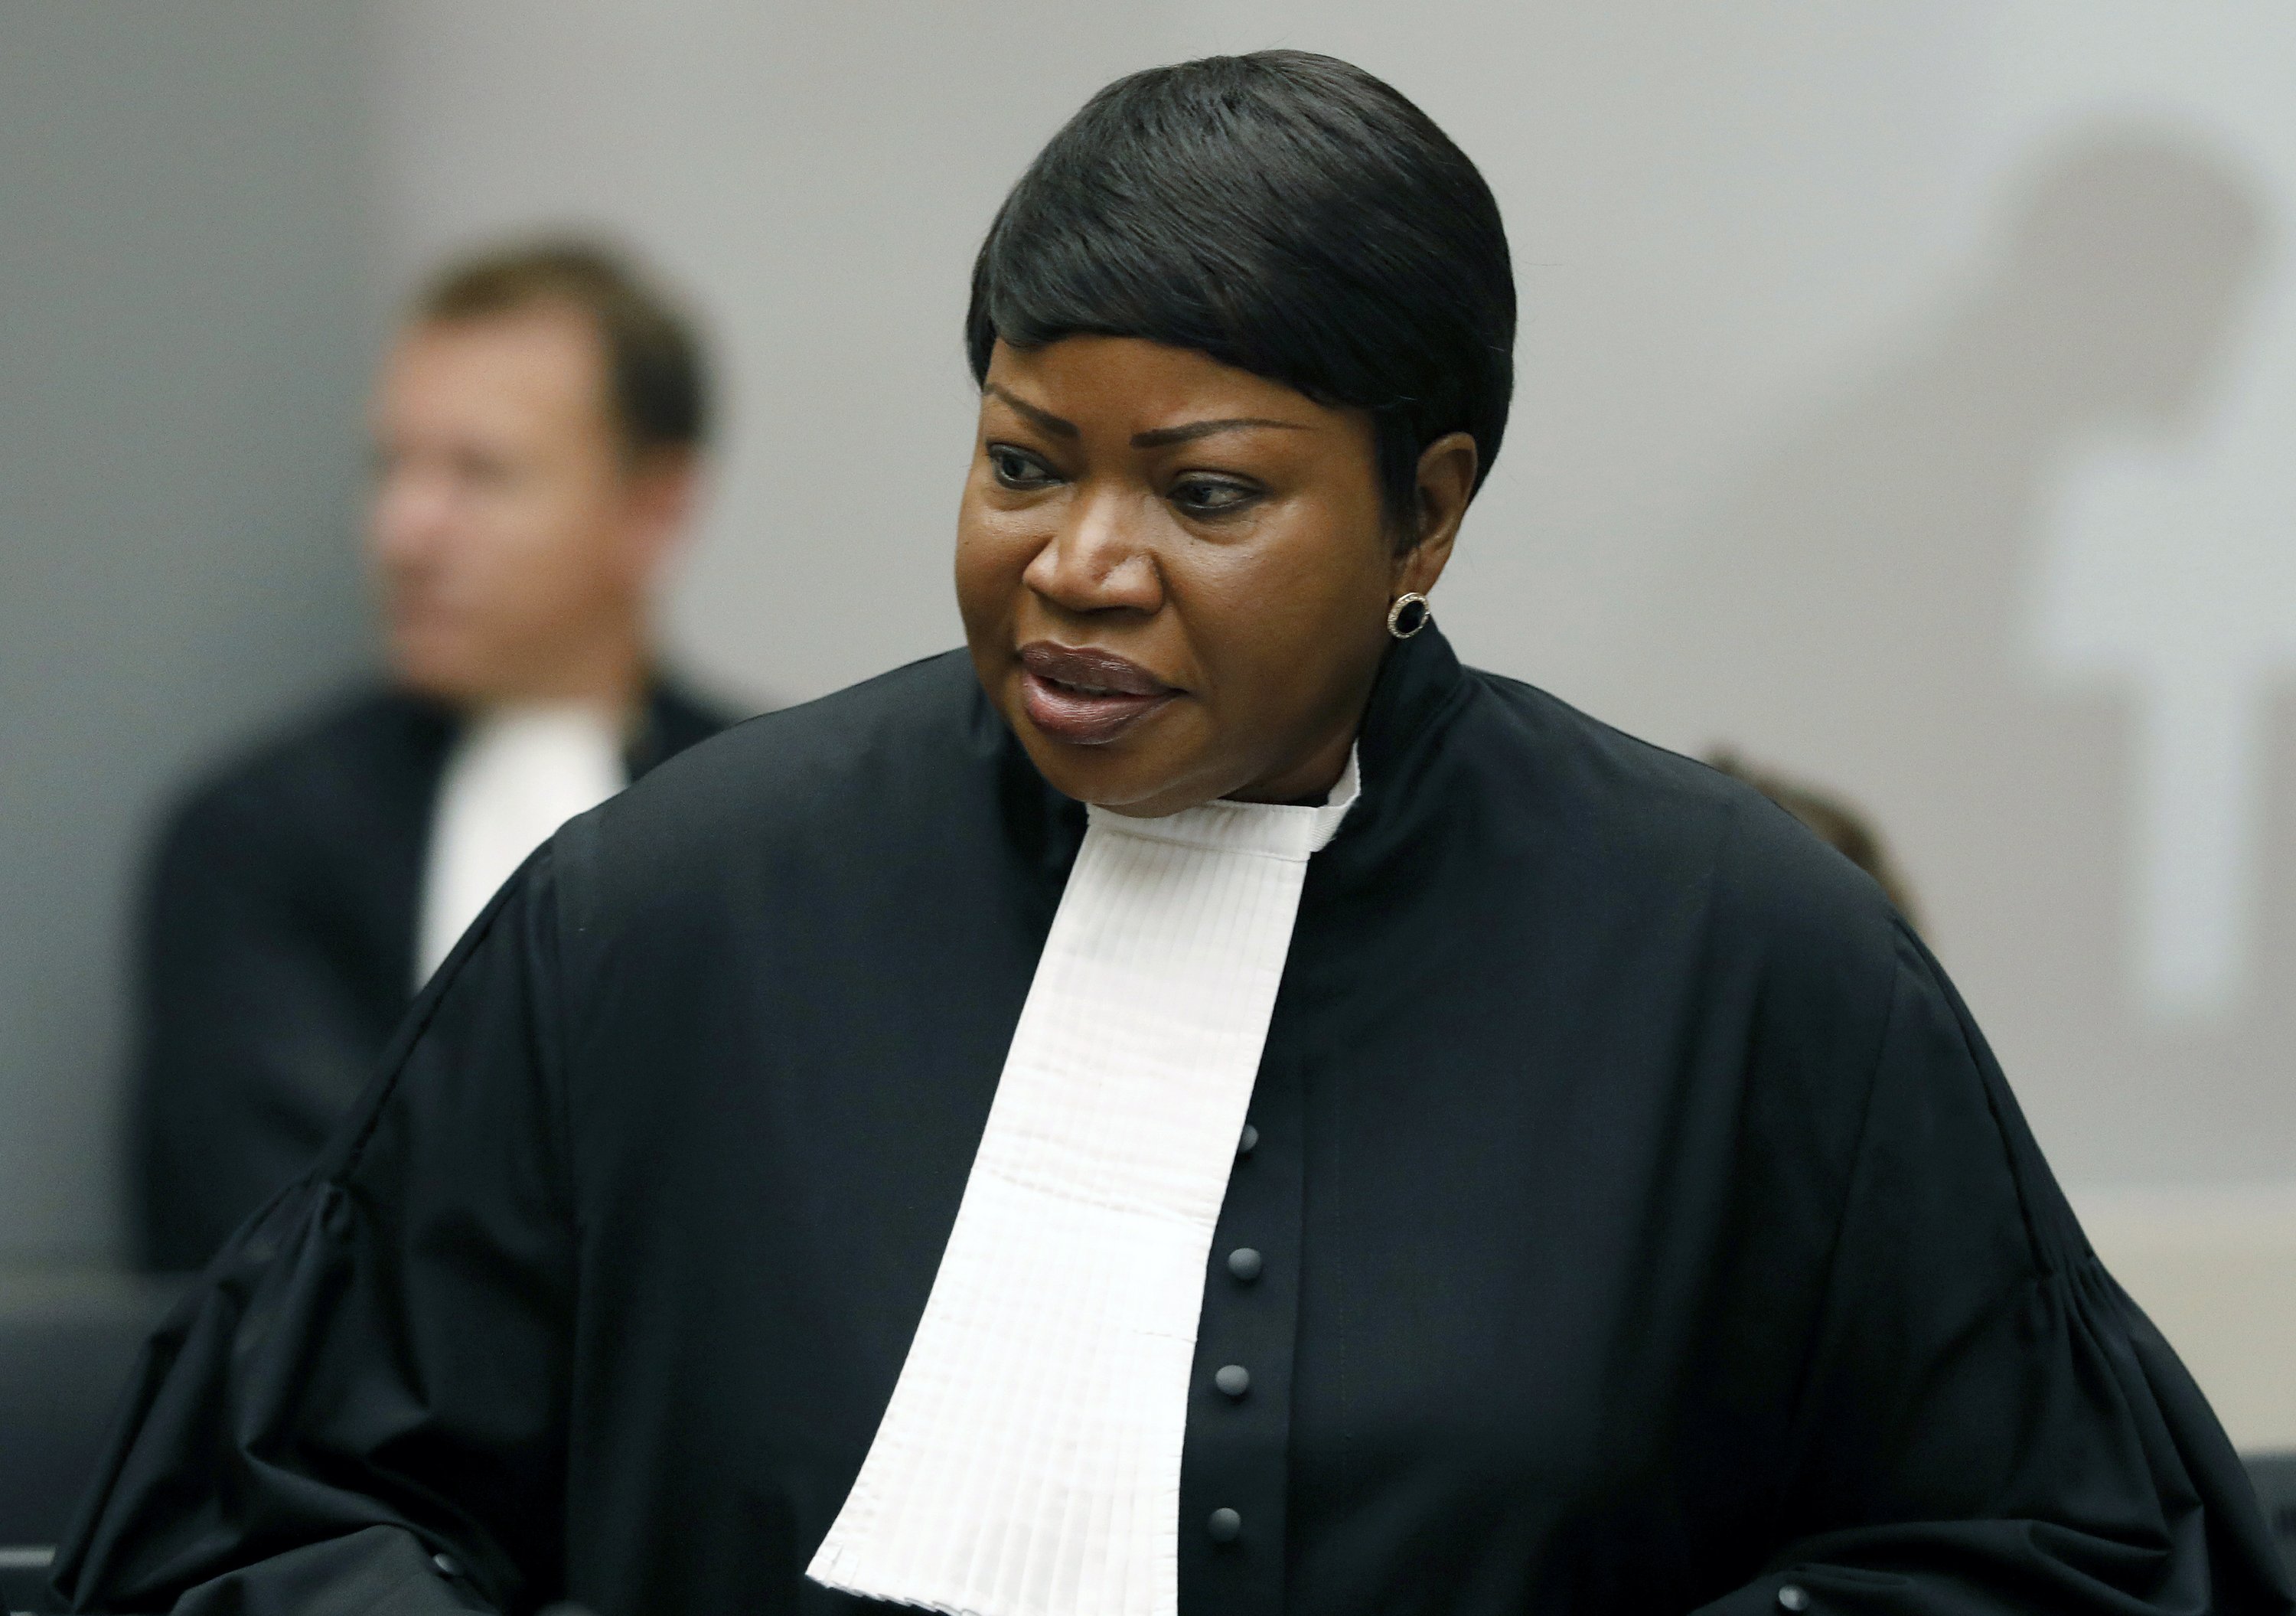 ICC launches war crimes investigation into Israeli practices